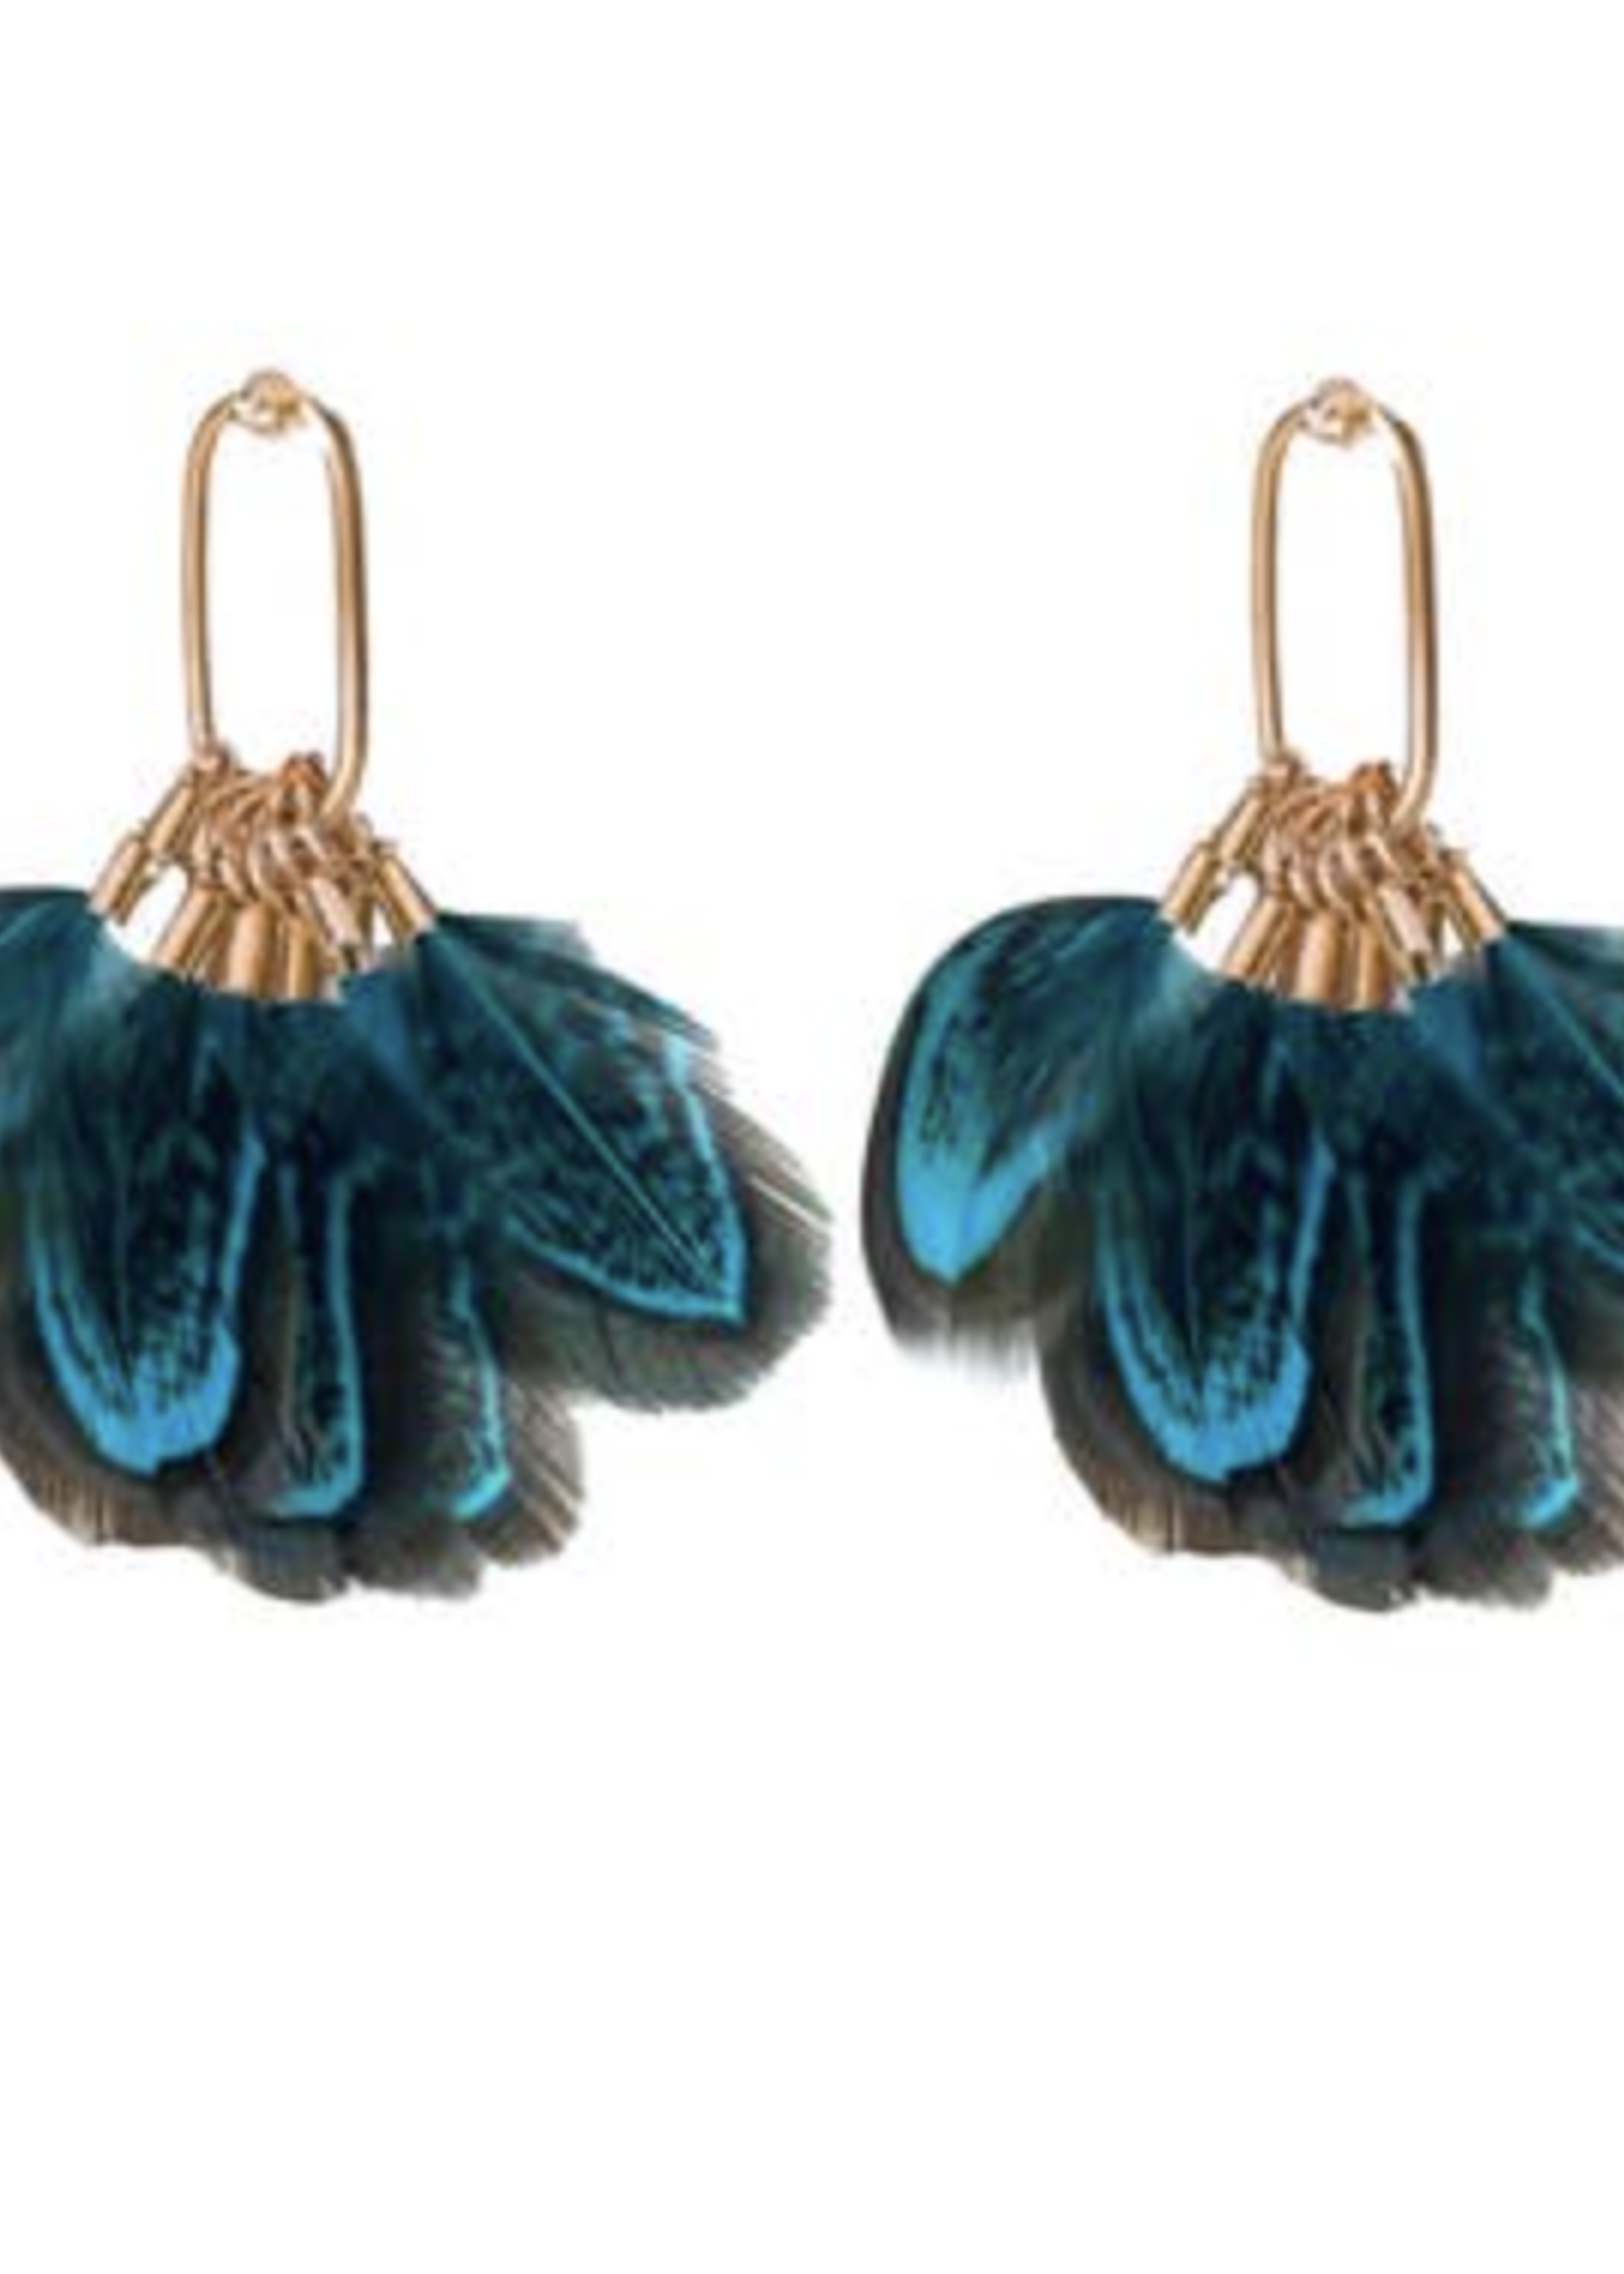 ST. ARMANDS OF DESIGNS OF SARASOTA PEACOCK FEATHER STATEMENT TASSEL EARRINGS